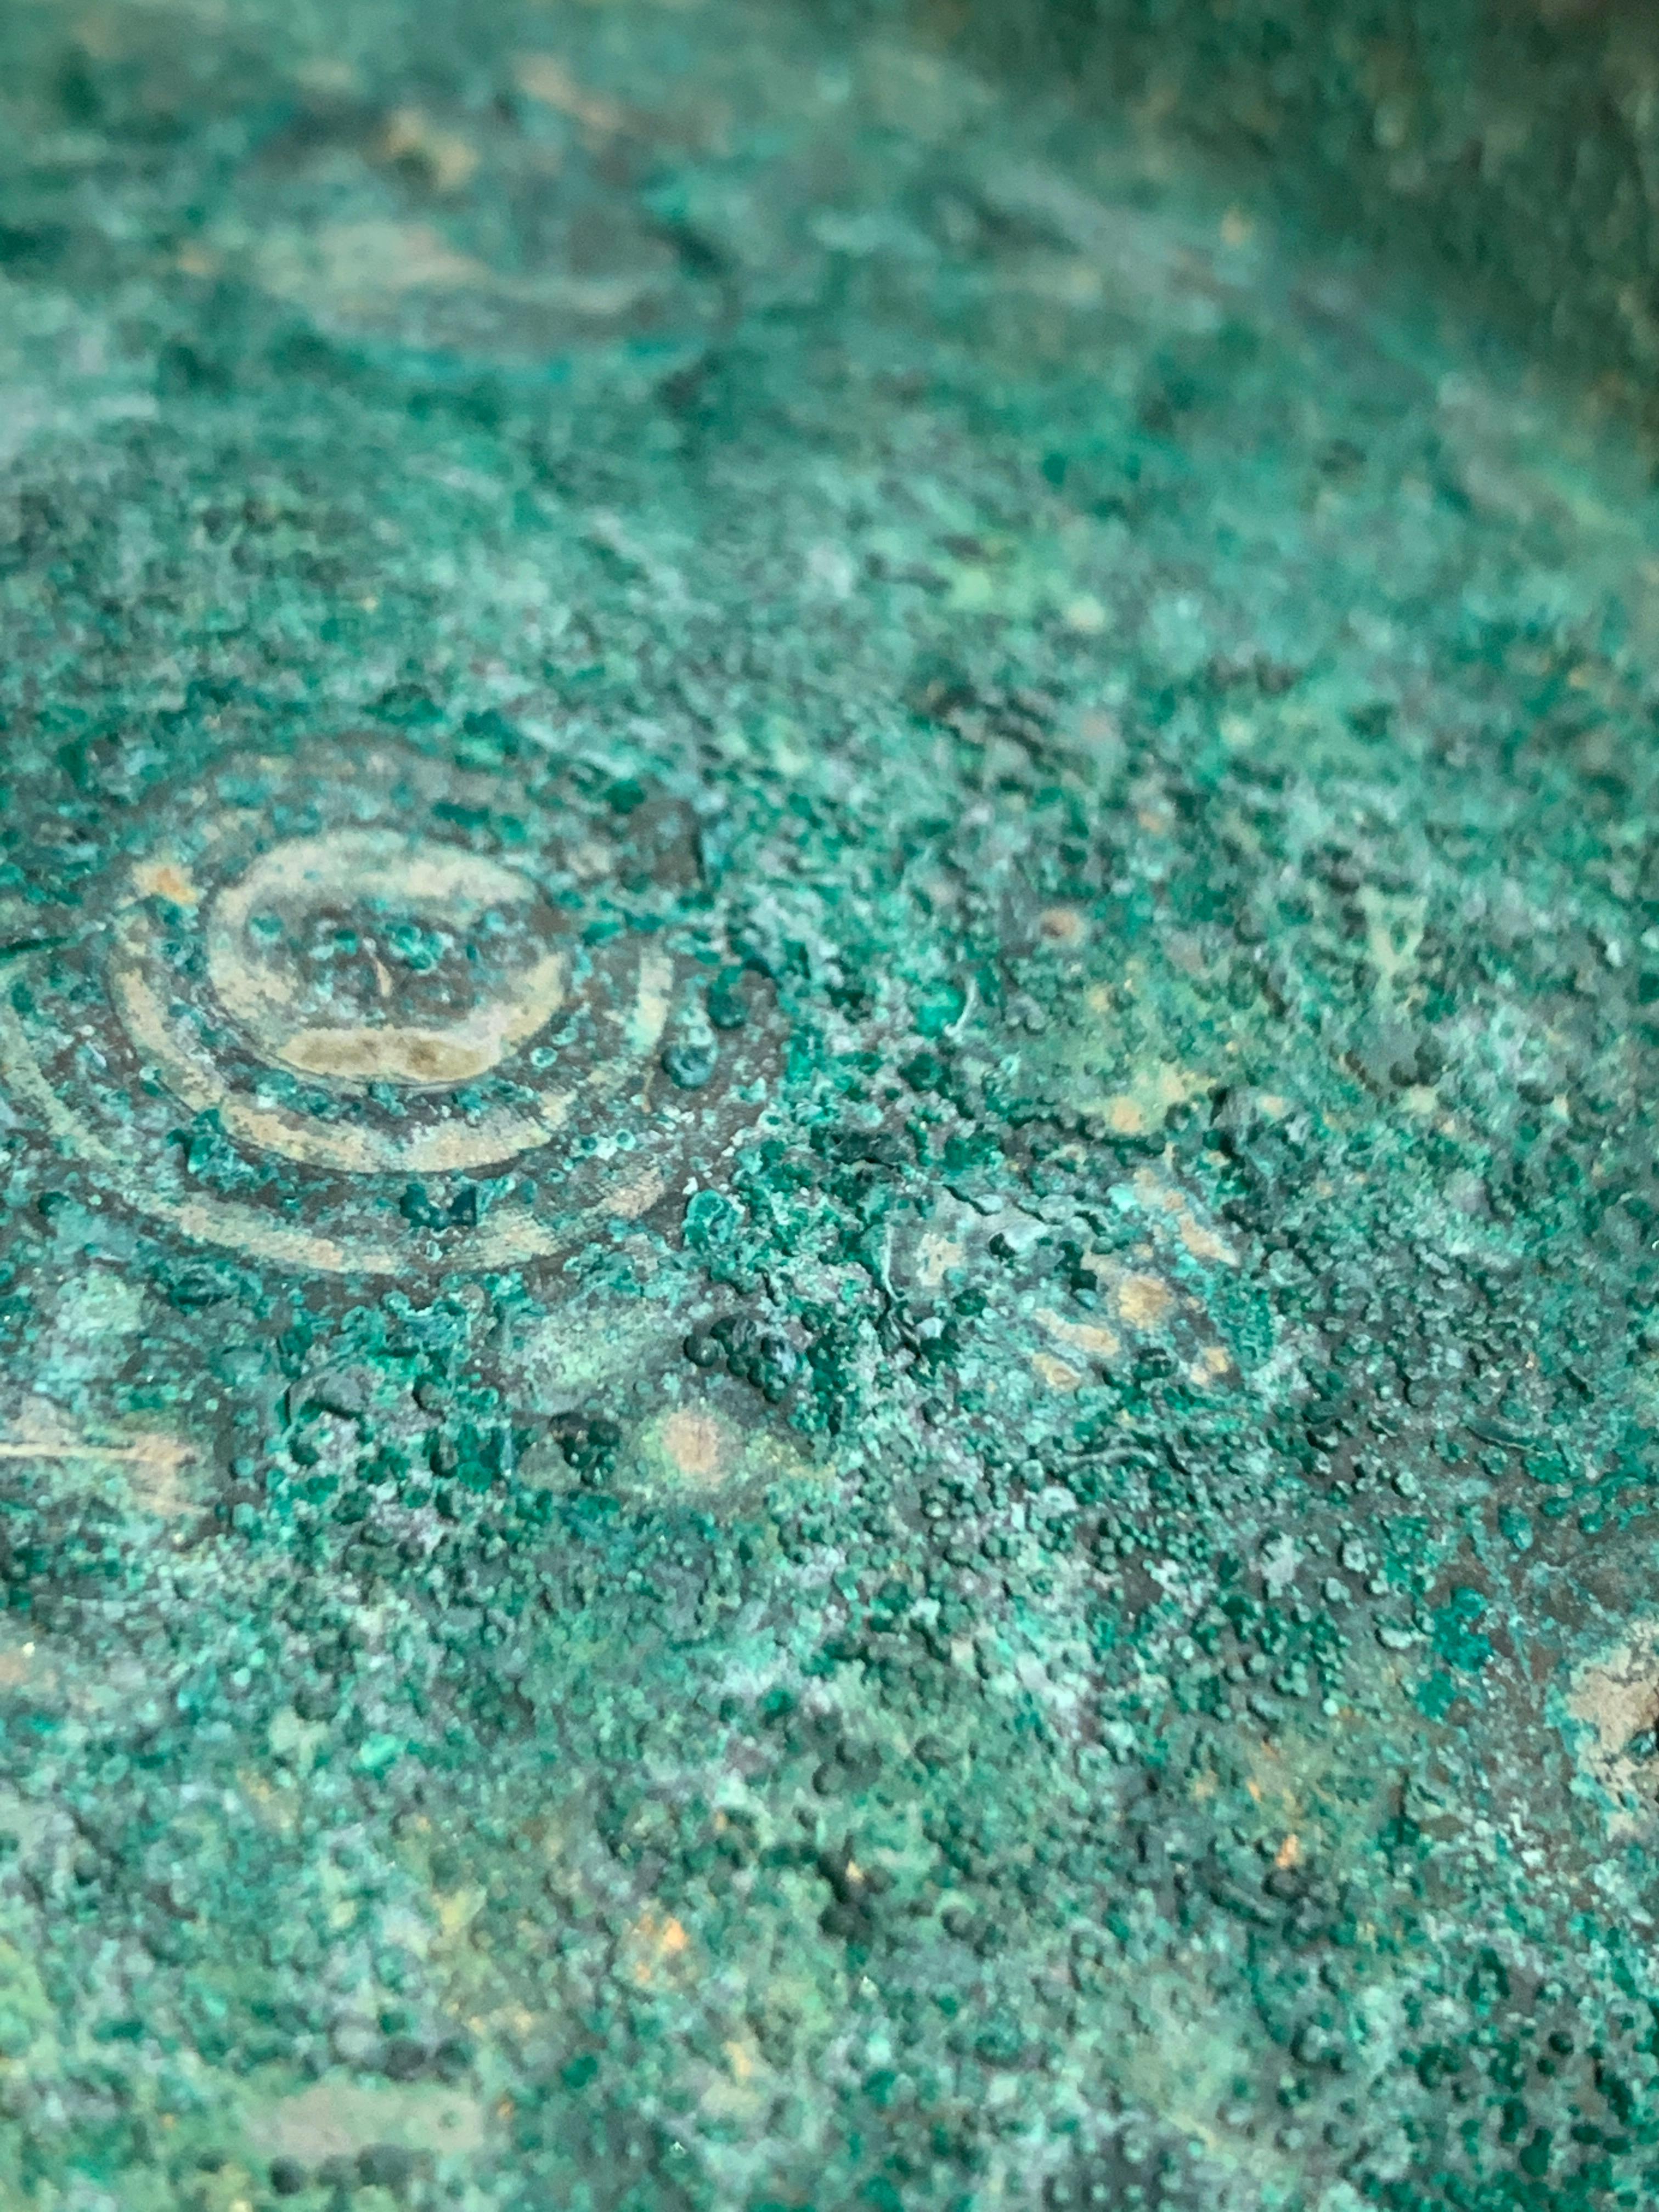 Korean Goryeo Dynasty Bronze Bowl and Cover with Green Patina, 13th Century 5